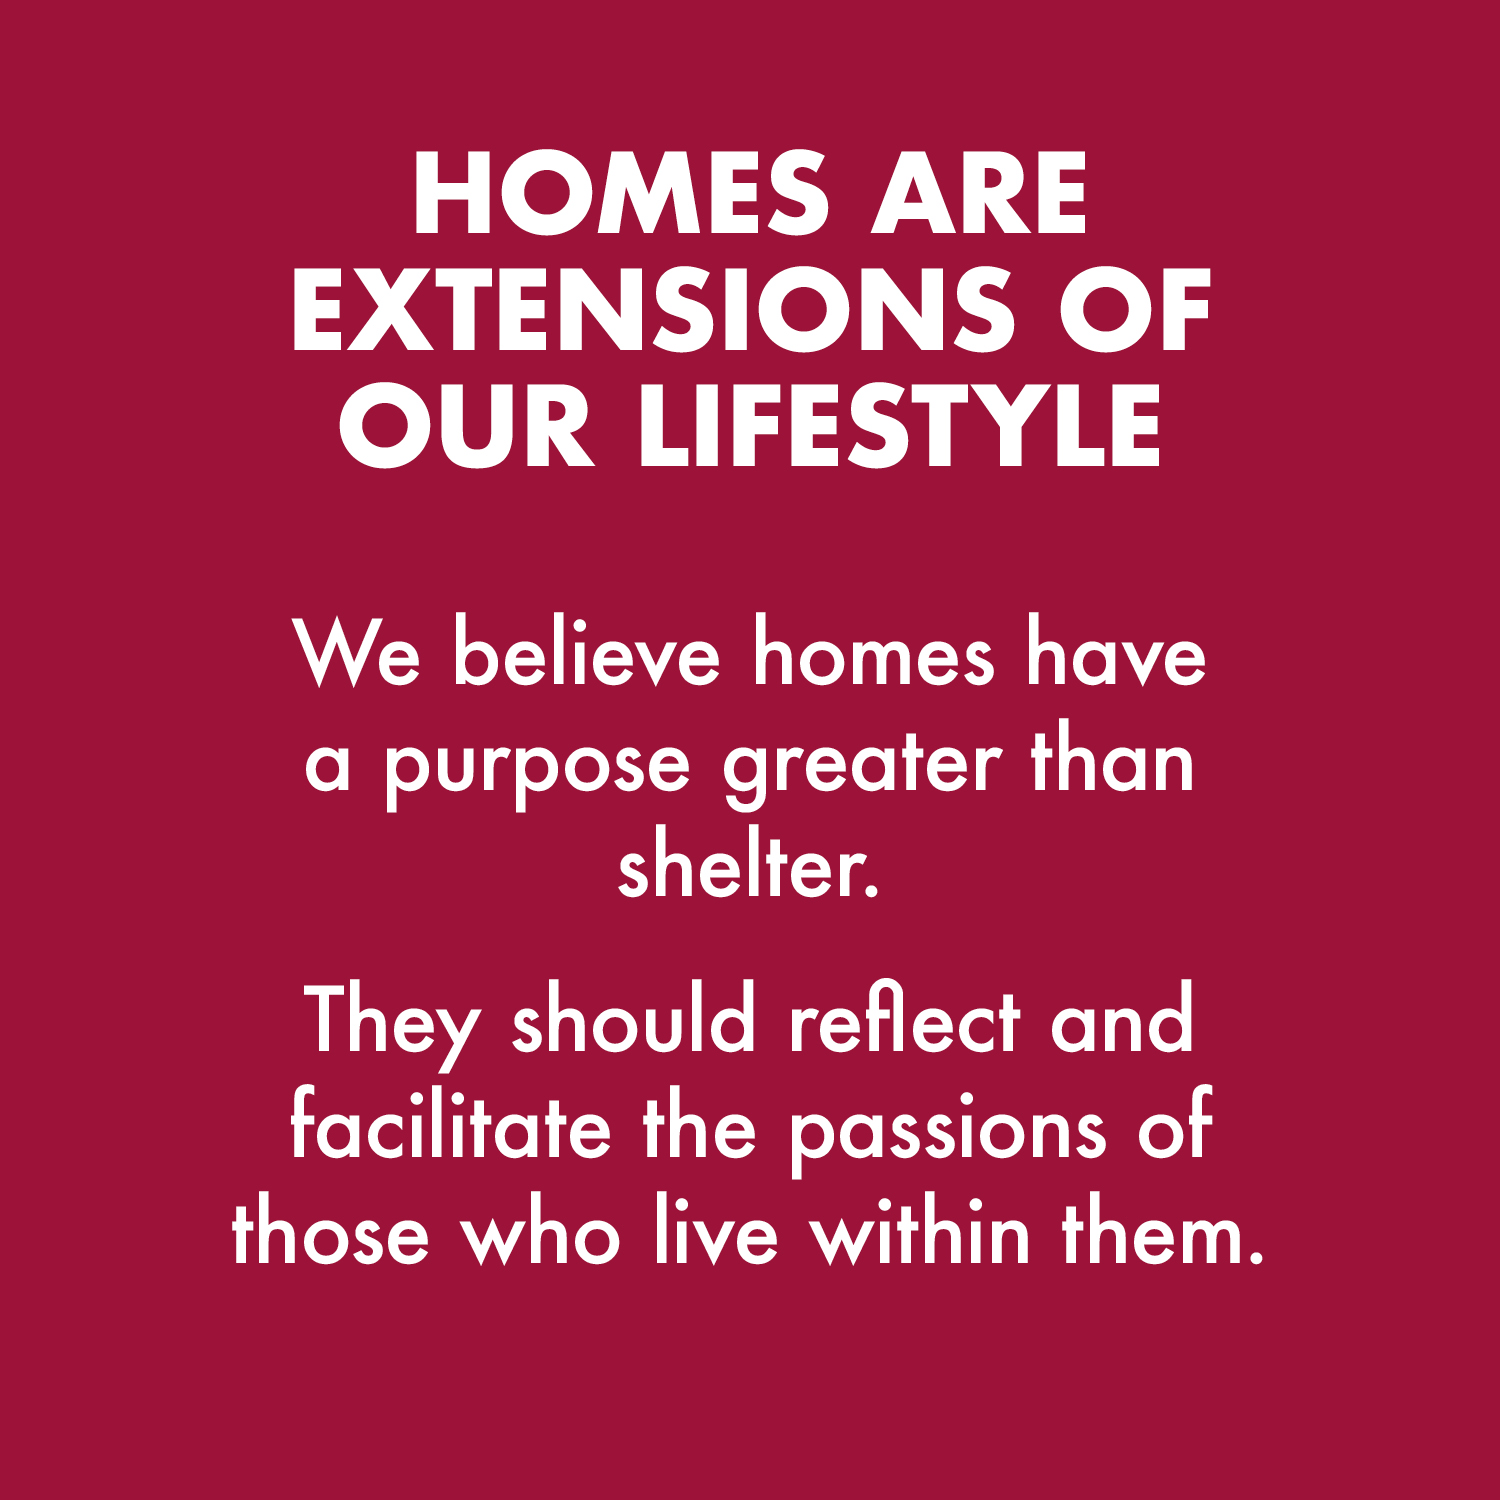 Homes are extensions of our lifestyle graphic